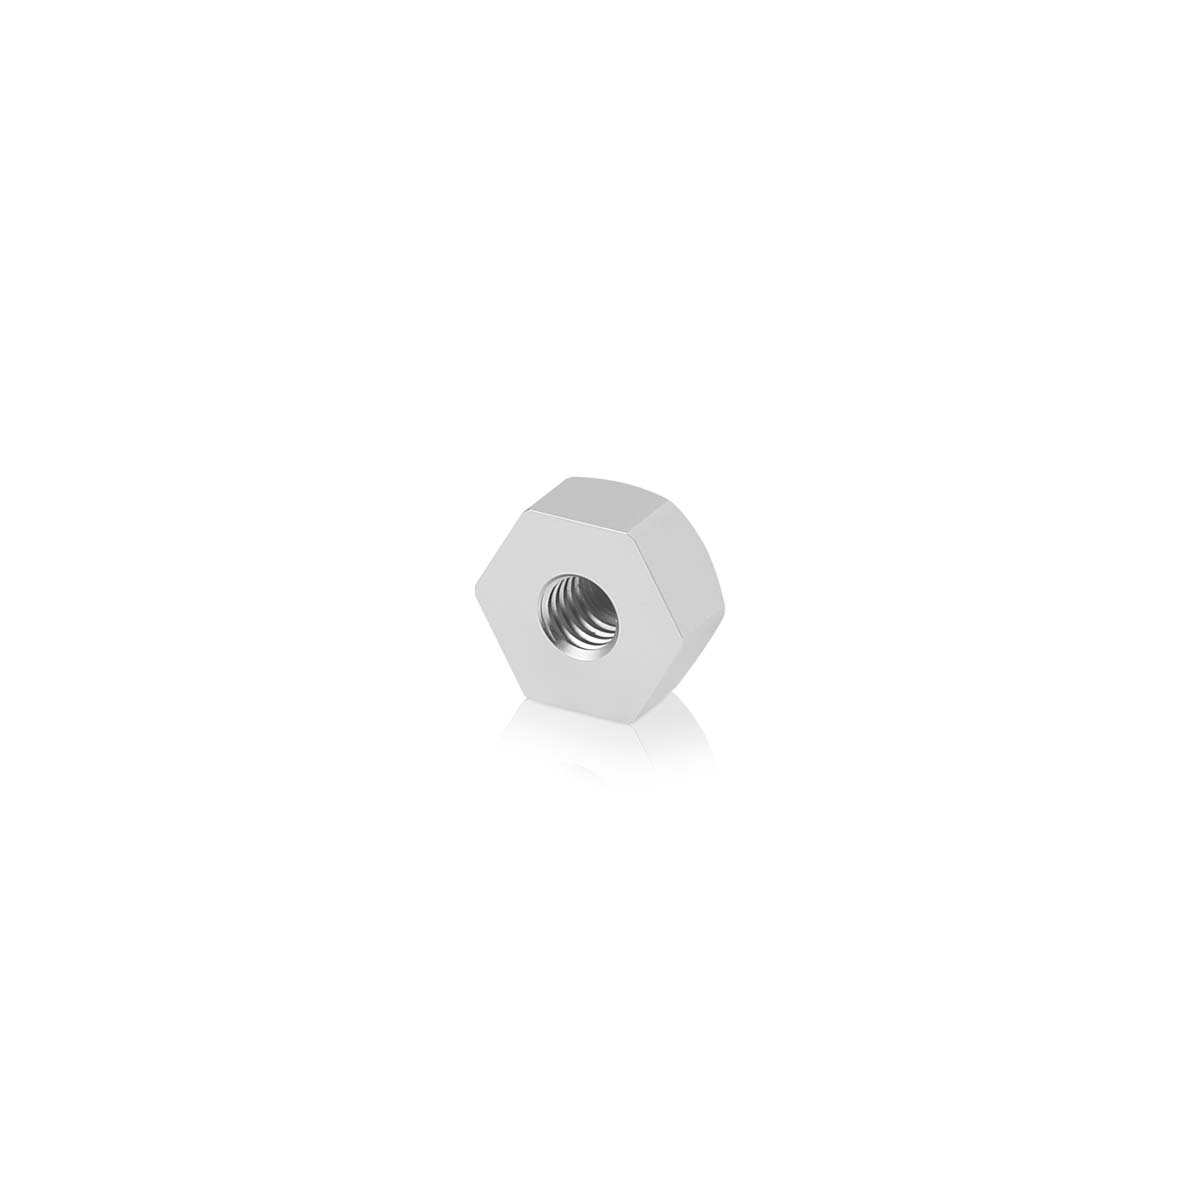 5/16-18 Threaded Hex 3/4'' Caps, Height: 3/8'', Clear Anodized Aluminum [Required Material Hole Size: 3/8'']